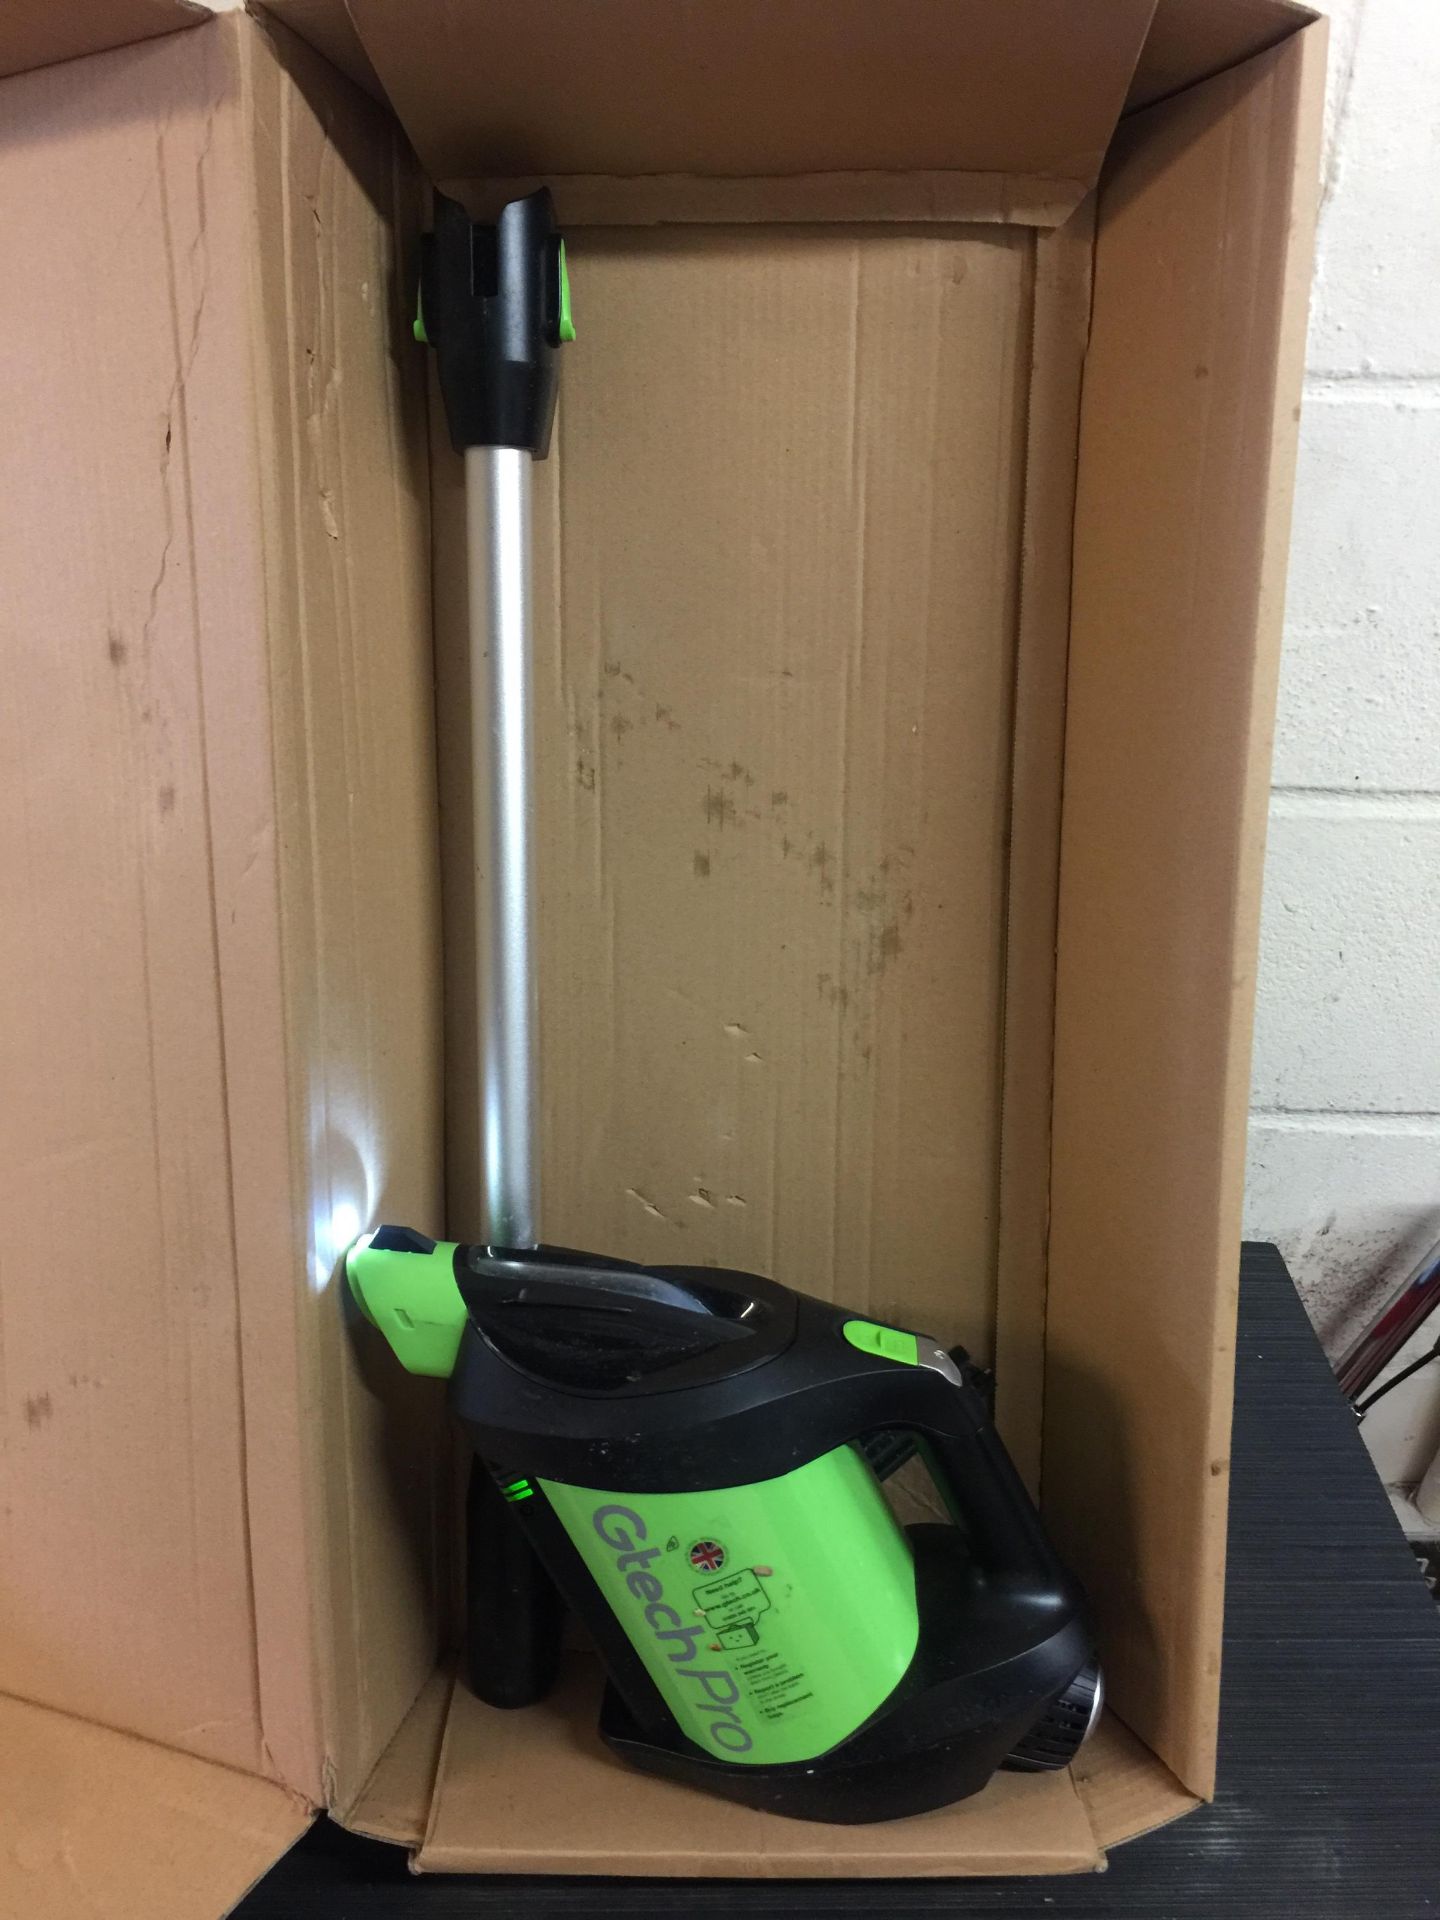 Gtech Pro Bagged Cordless Vacuum Cleaner, Green (without charger)